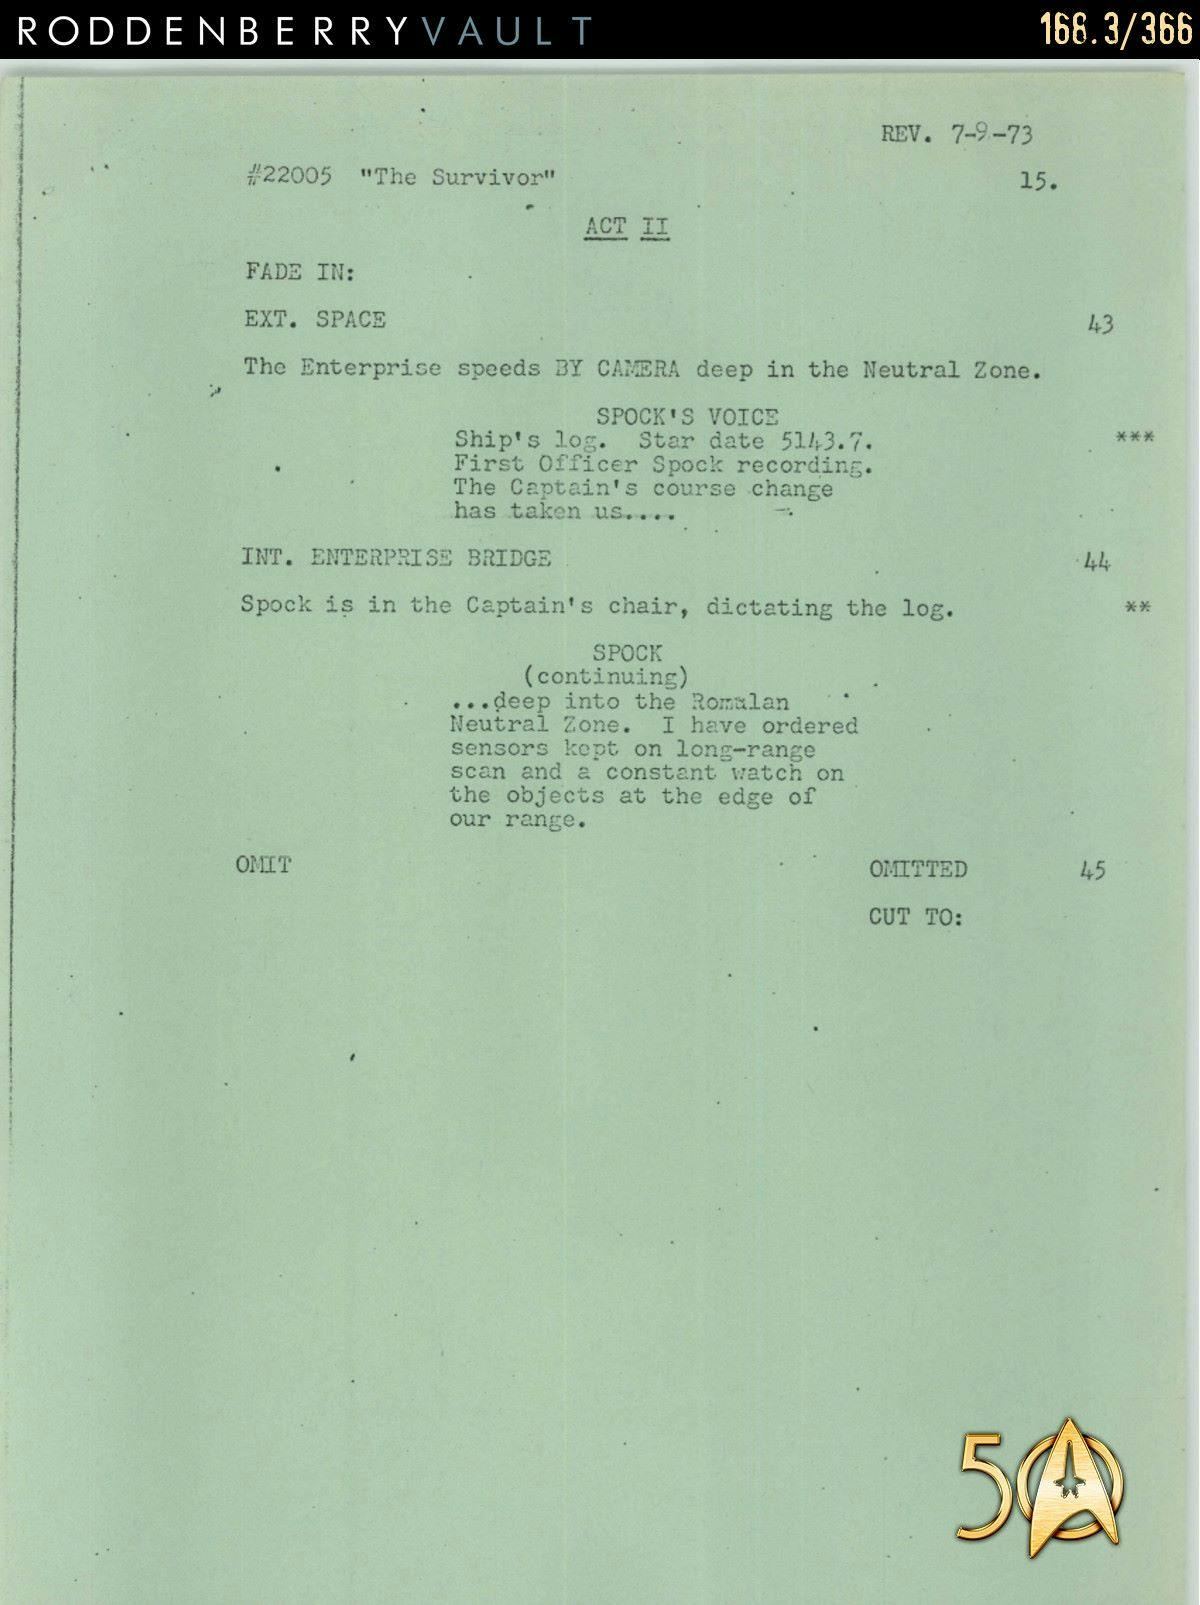 From the Roddenberry 366 Vault - The Animated Series - 'The Survivor' script